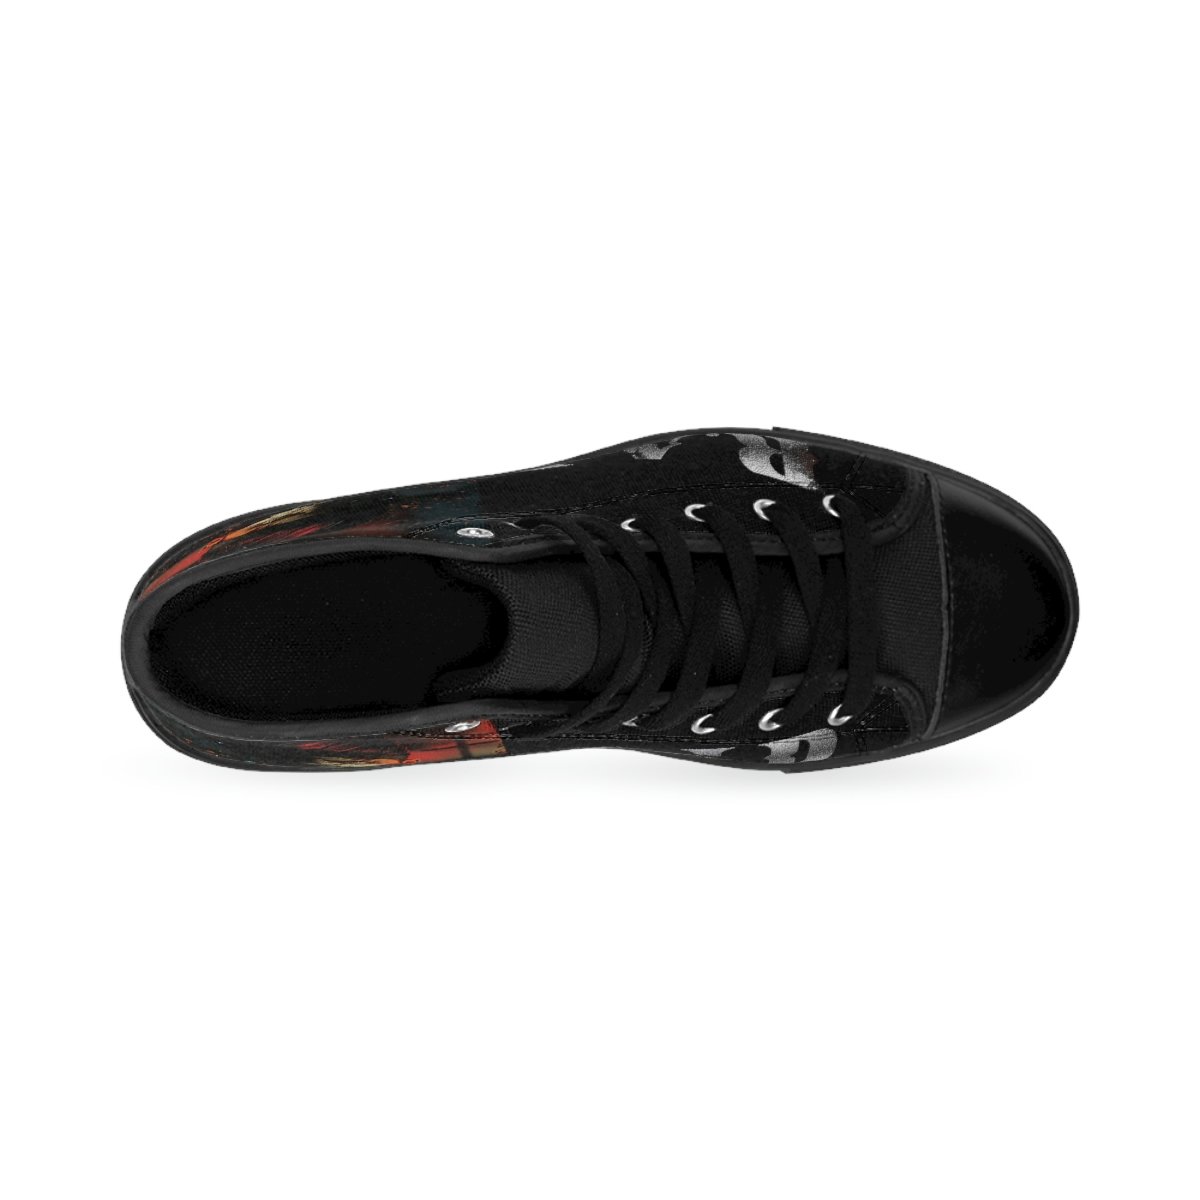 R.A.I.D – The Strong Survive Men’s High-top Sneakers